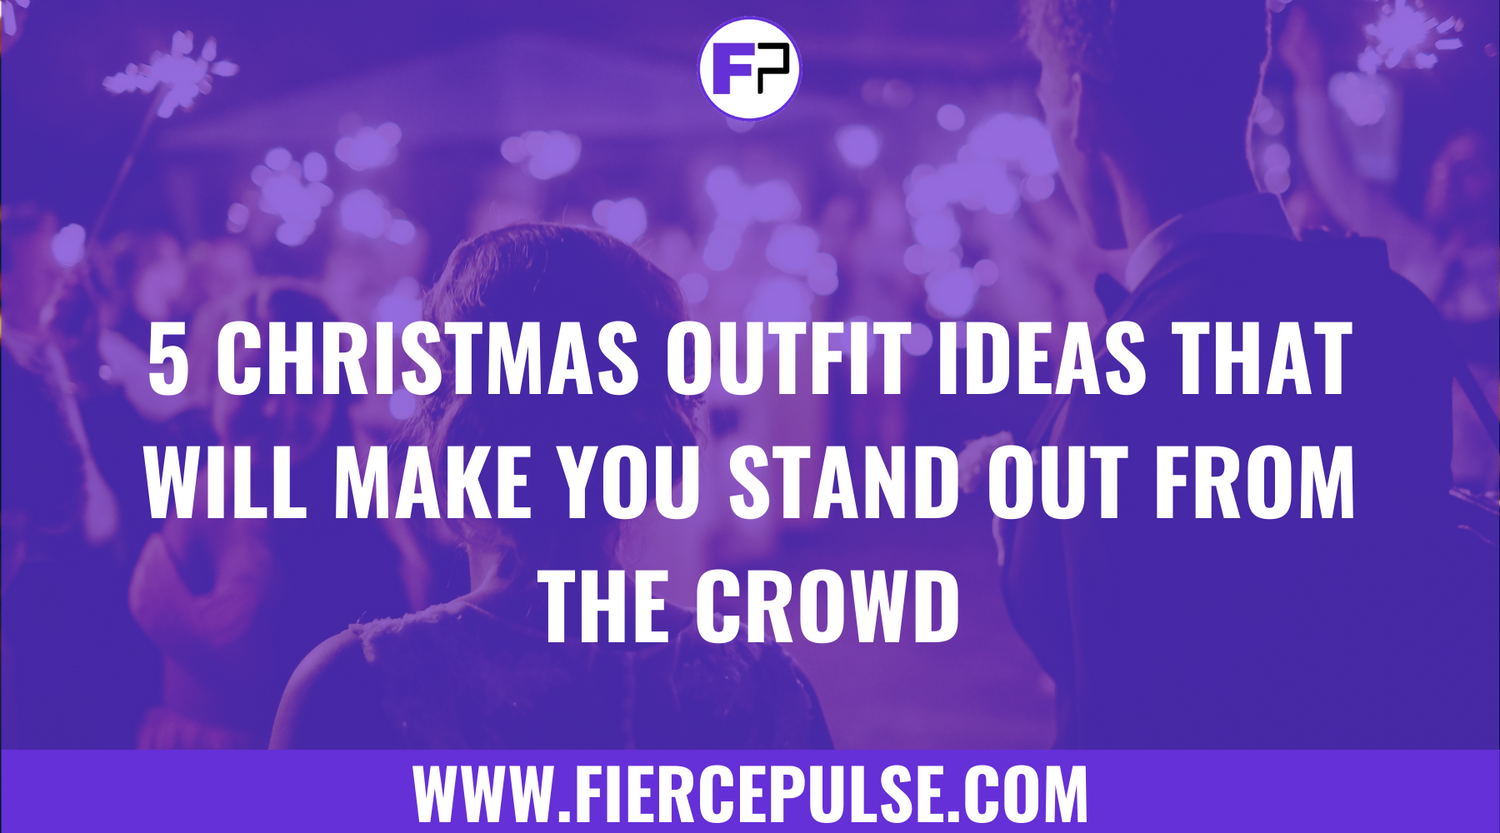 Five Christmas Outfit Ideas That Will Make You Stand Out From the Crowd